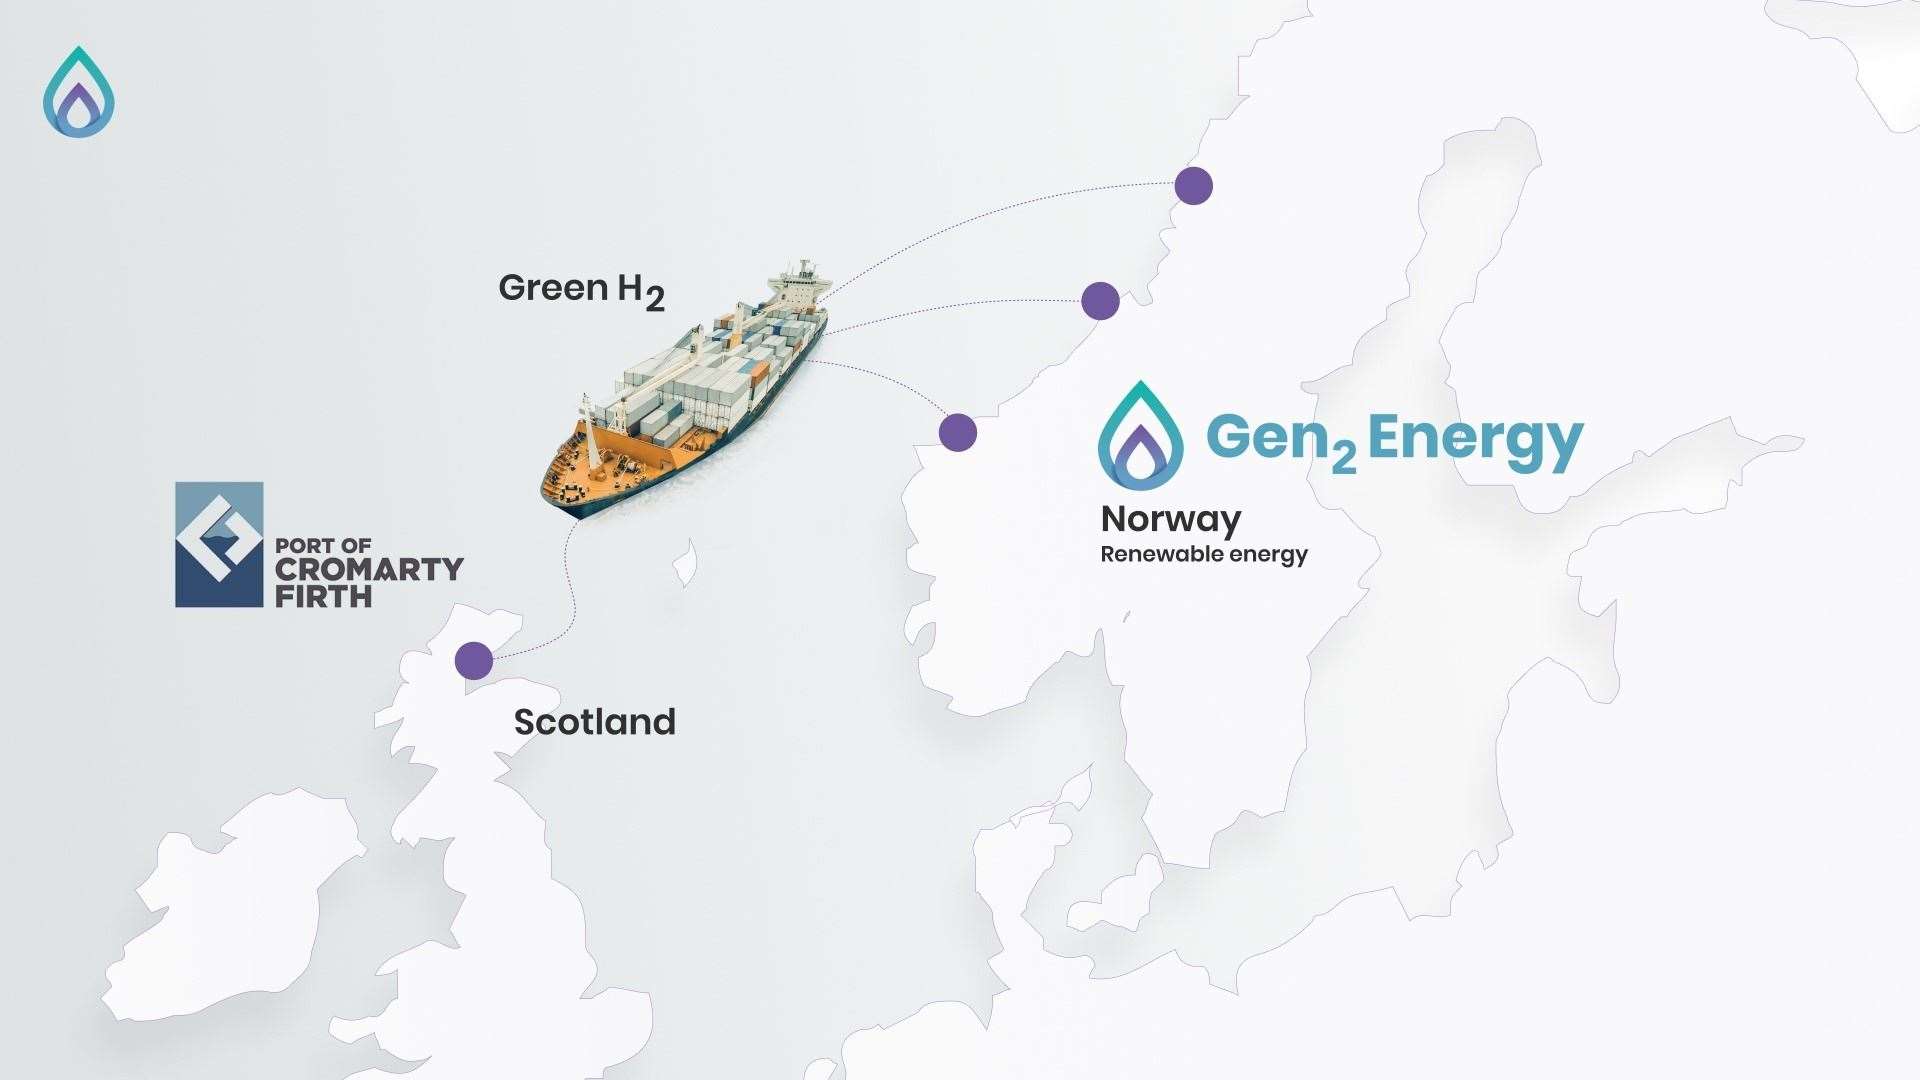 The Memorium of Understanding will allow green hydrogen to be imported to the Cromarty Firth from Norway.